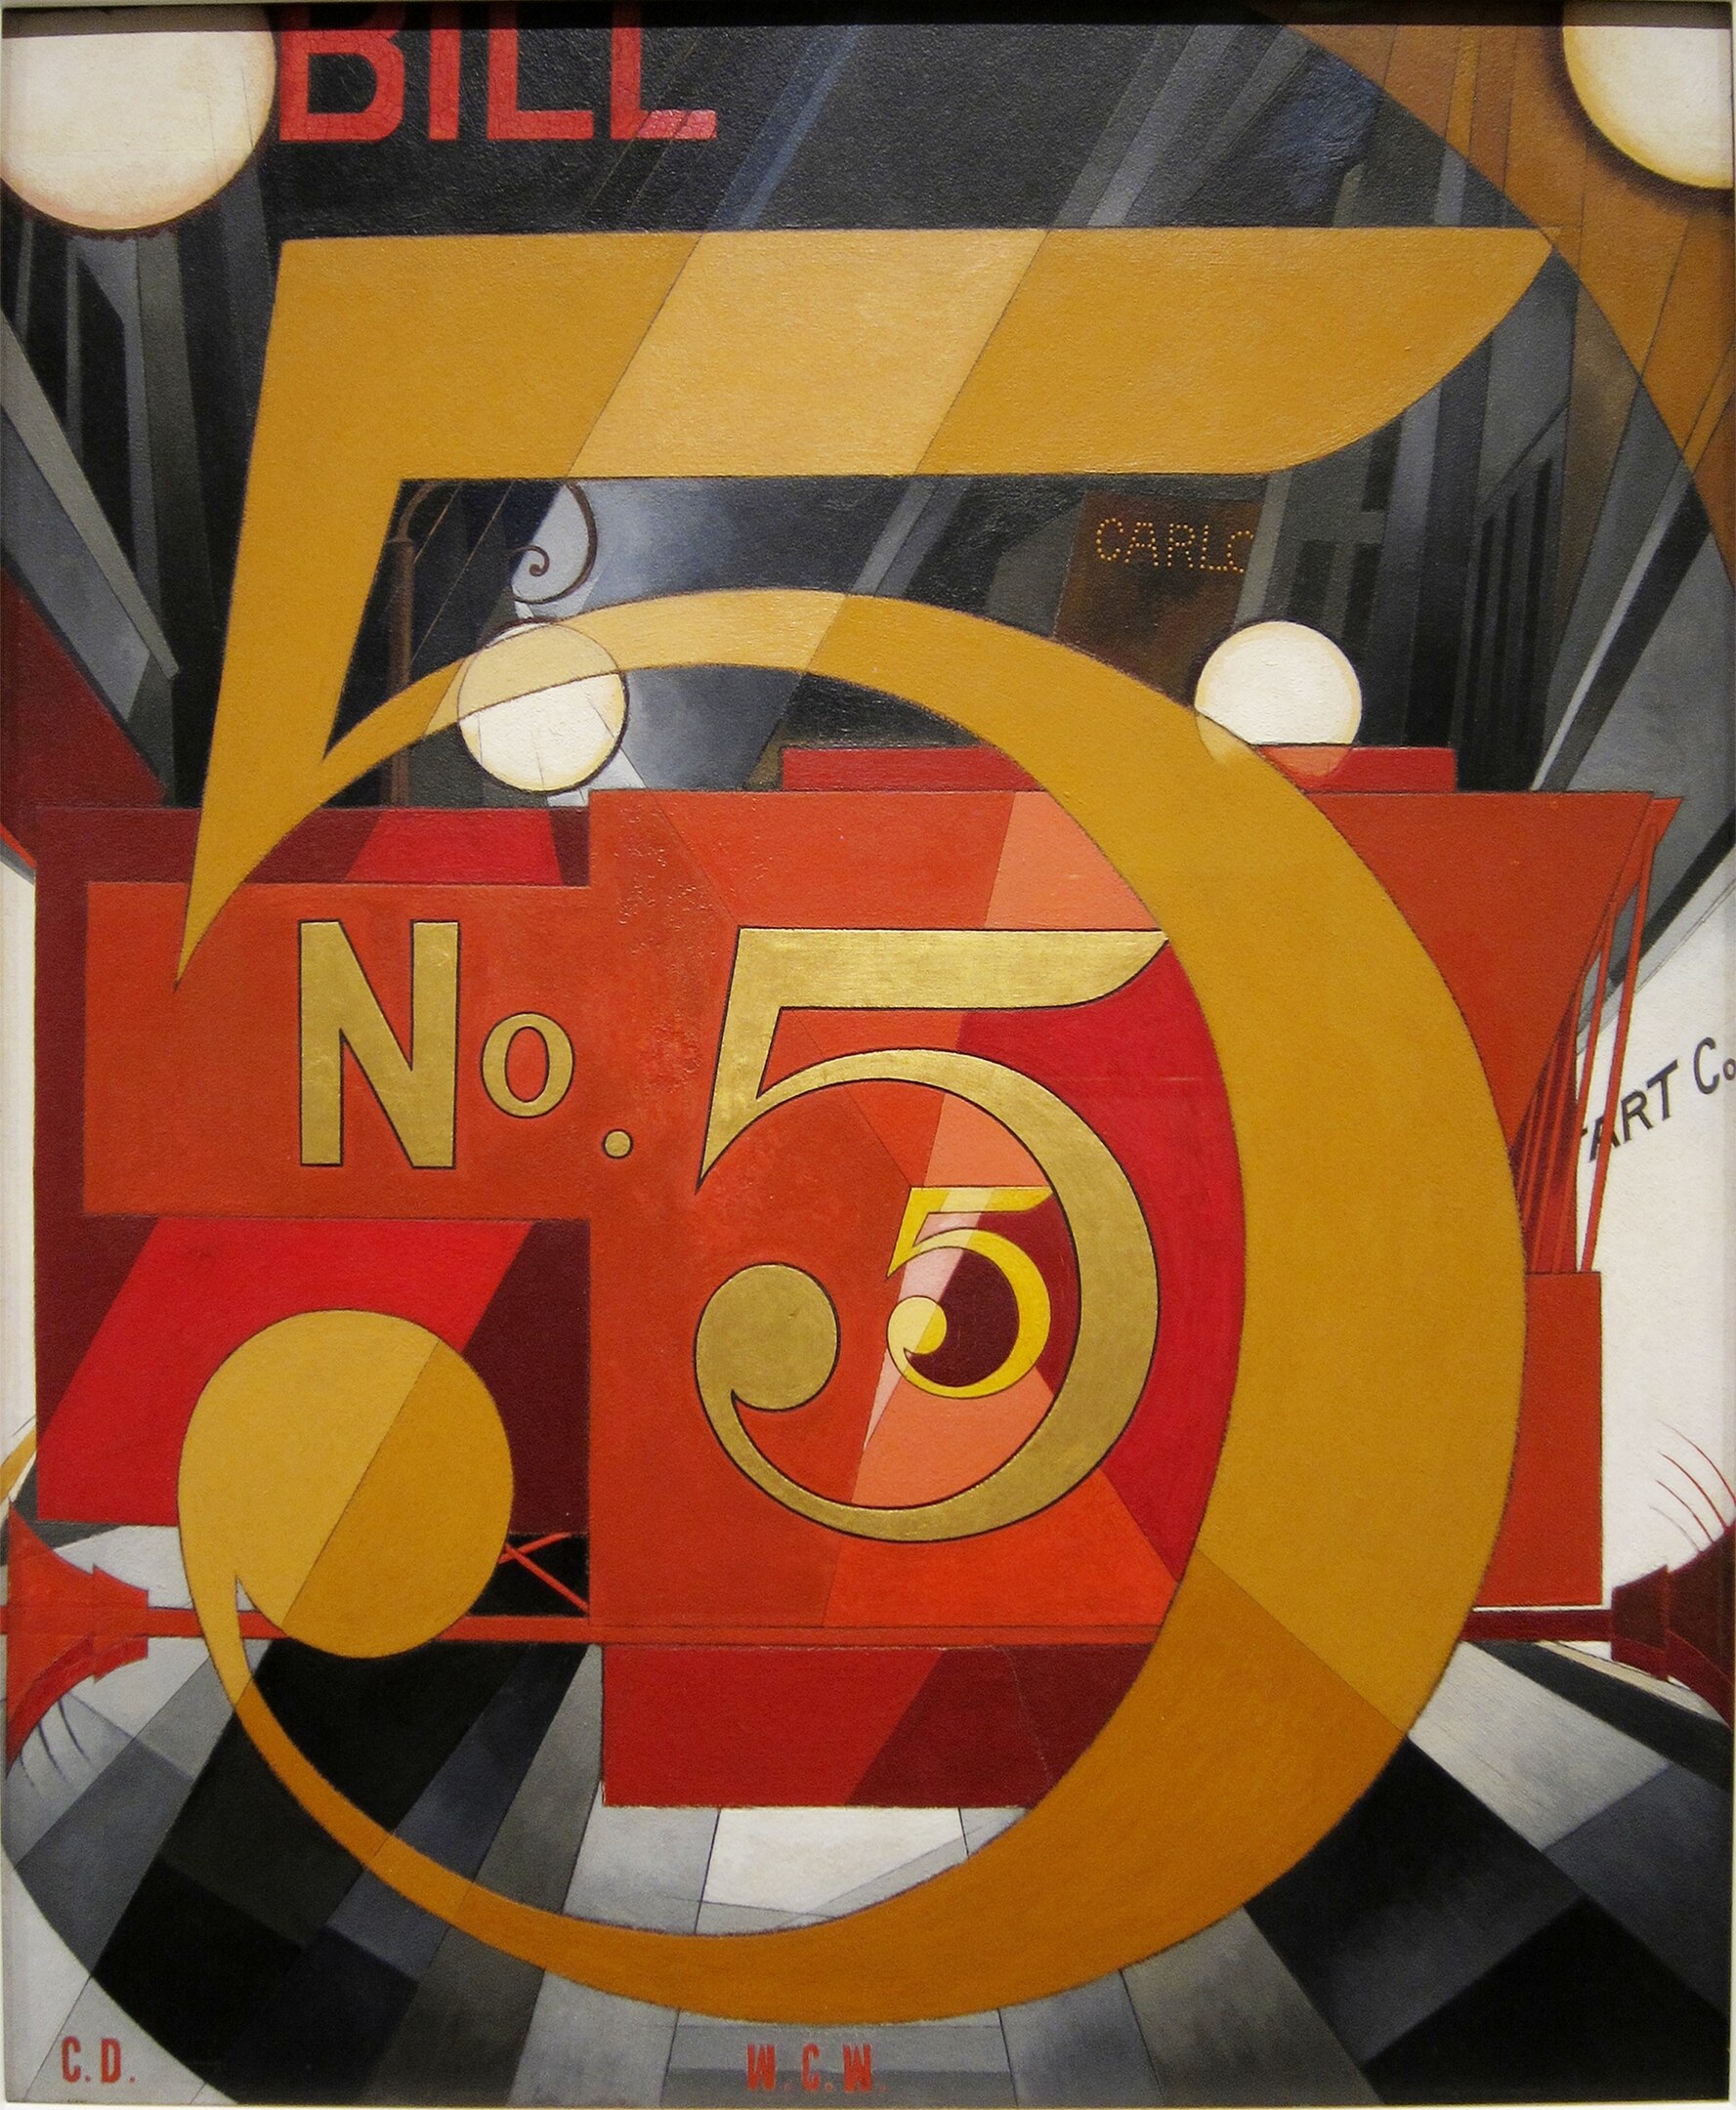 The numerical symbol for five appears twice in different sizes against an abstract background.